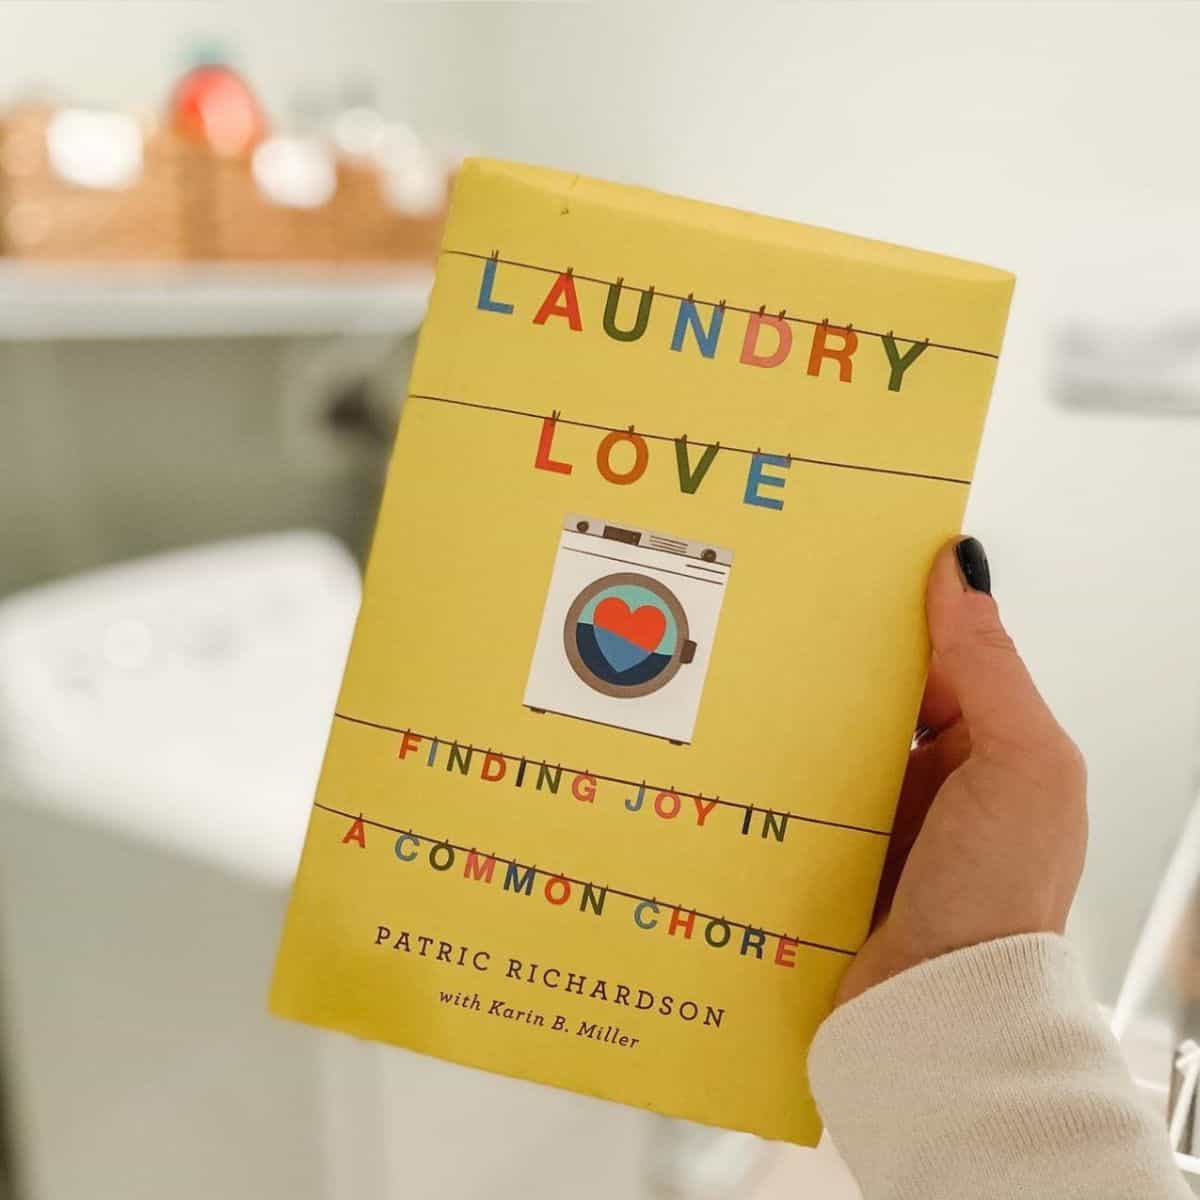 laundry love by patric richardson in a laundry room.